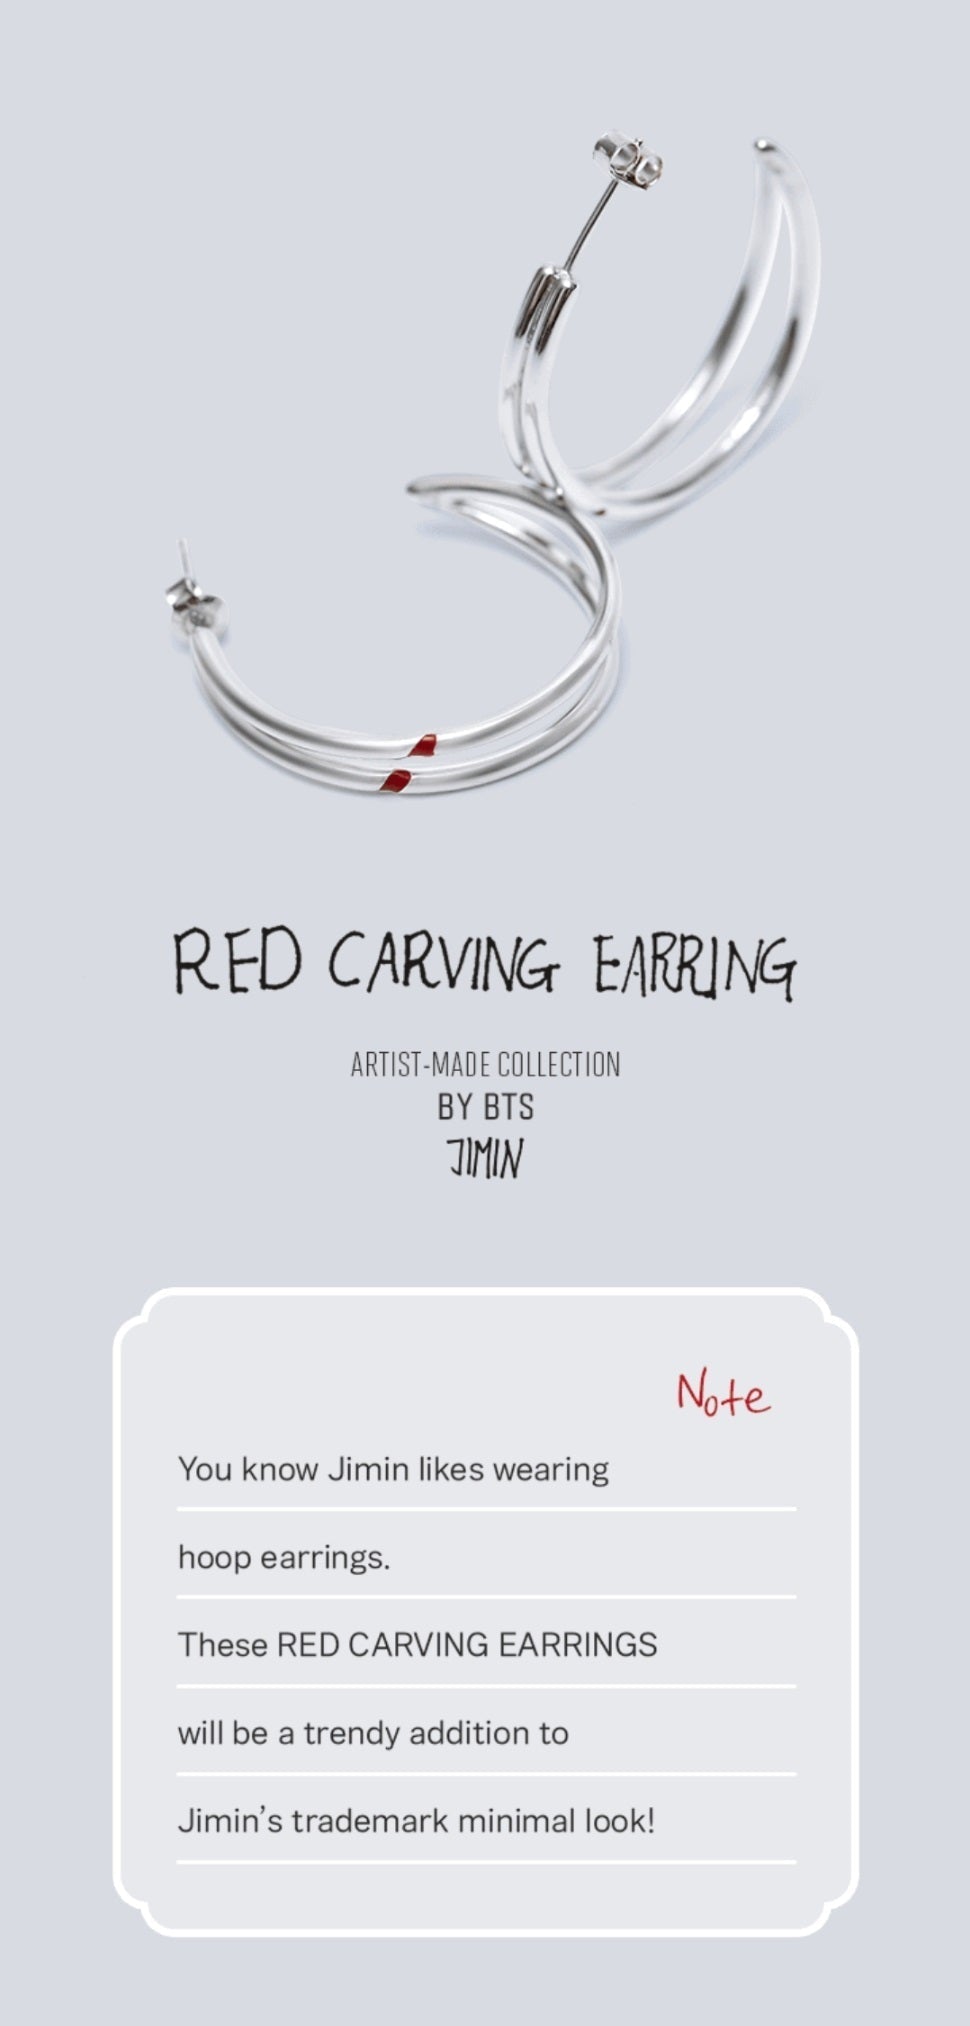 BTS JIMIN RED CARVING EARRING 即日発送します - ピアス